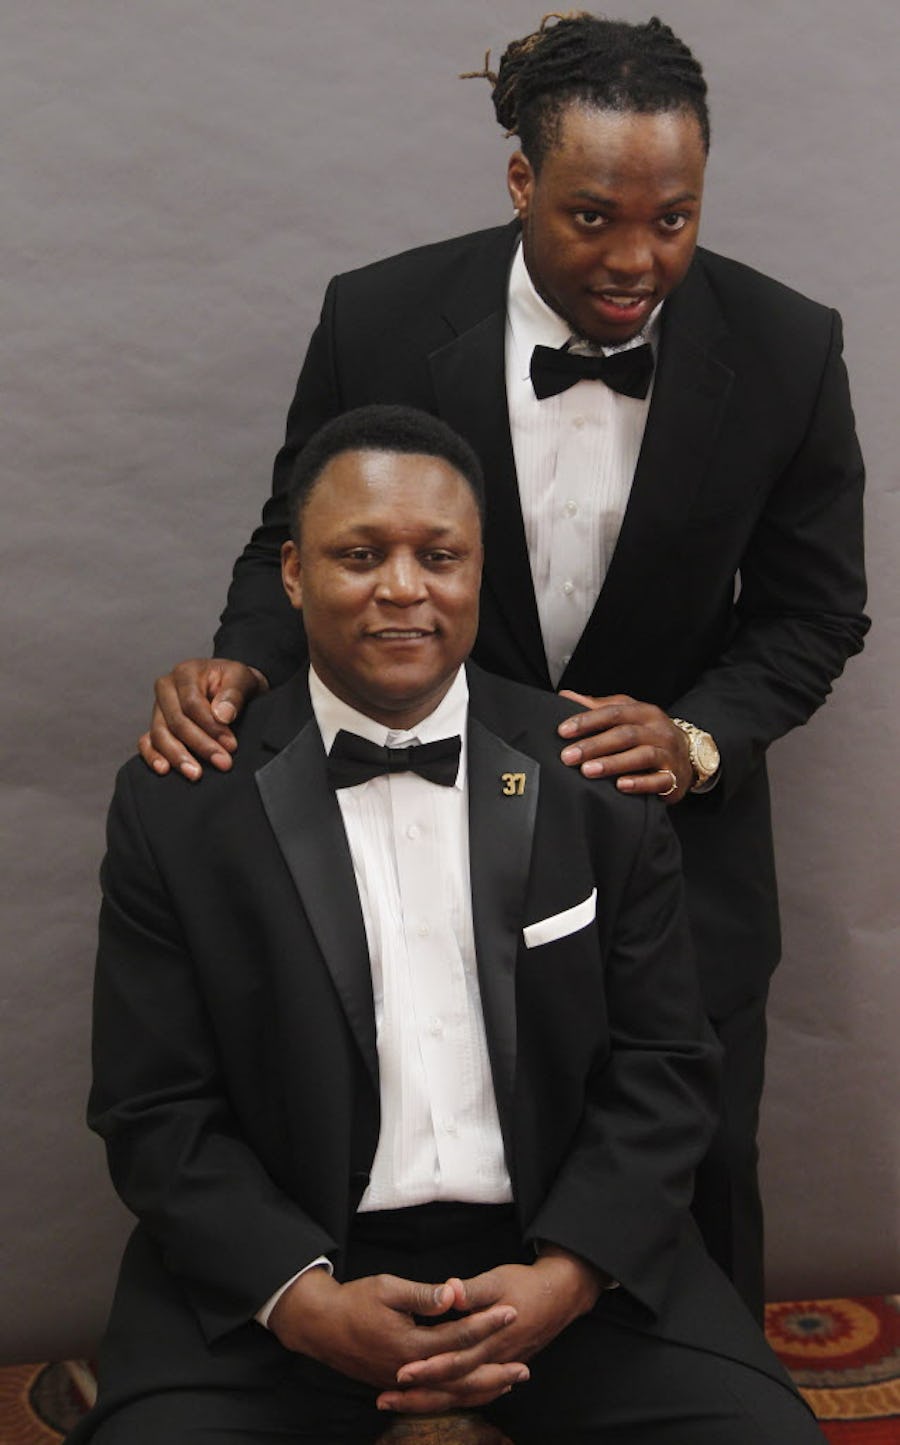 Derrick Henry, top, and Barry Sanders, bottom pose for photos at the  PwC Doak Walker Legends Award at the Hilton Anatole Hotel in Dallas, on February 19, 2016. (Michael Ainsworth/Special Contributor)